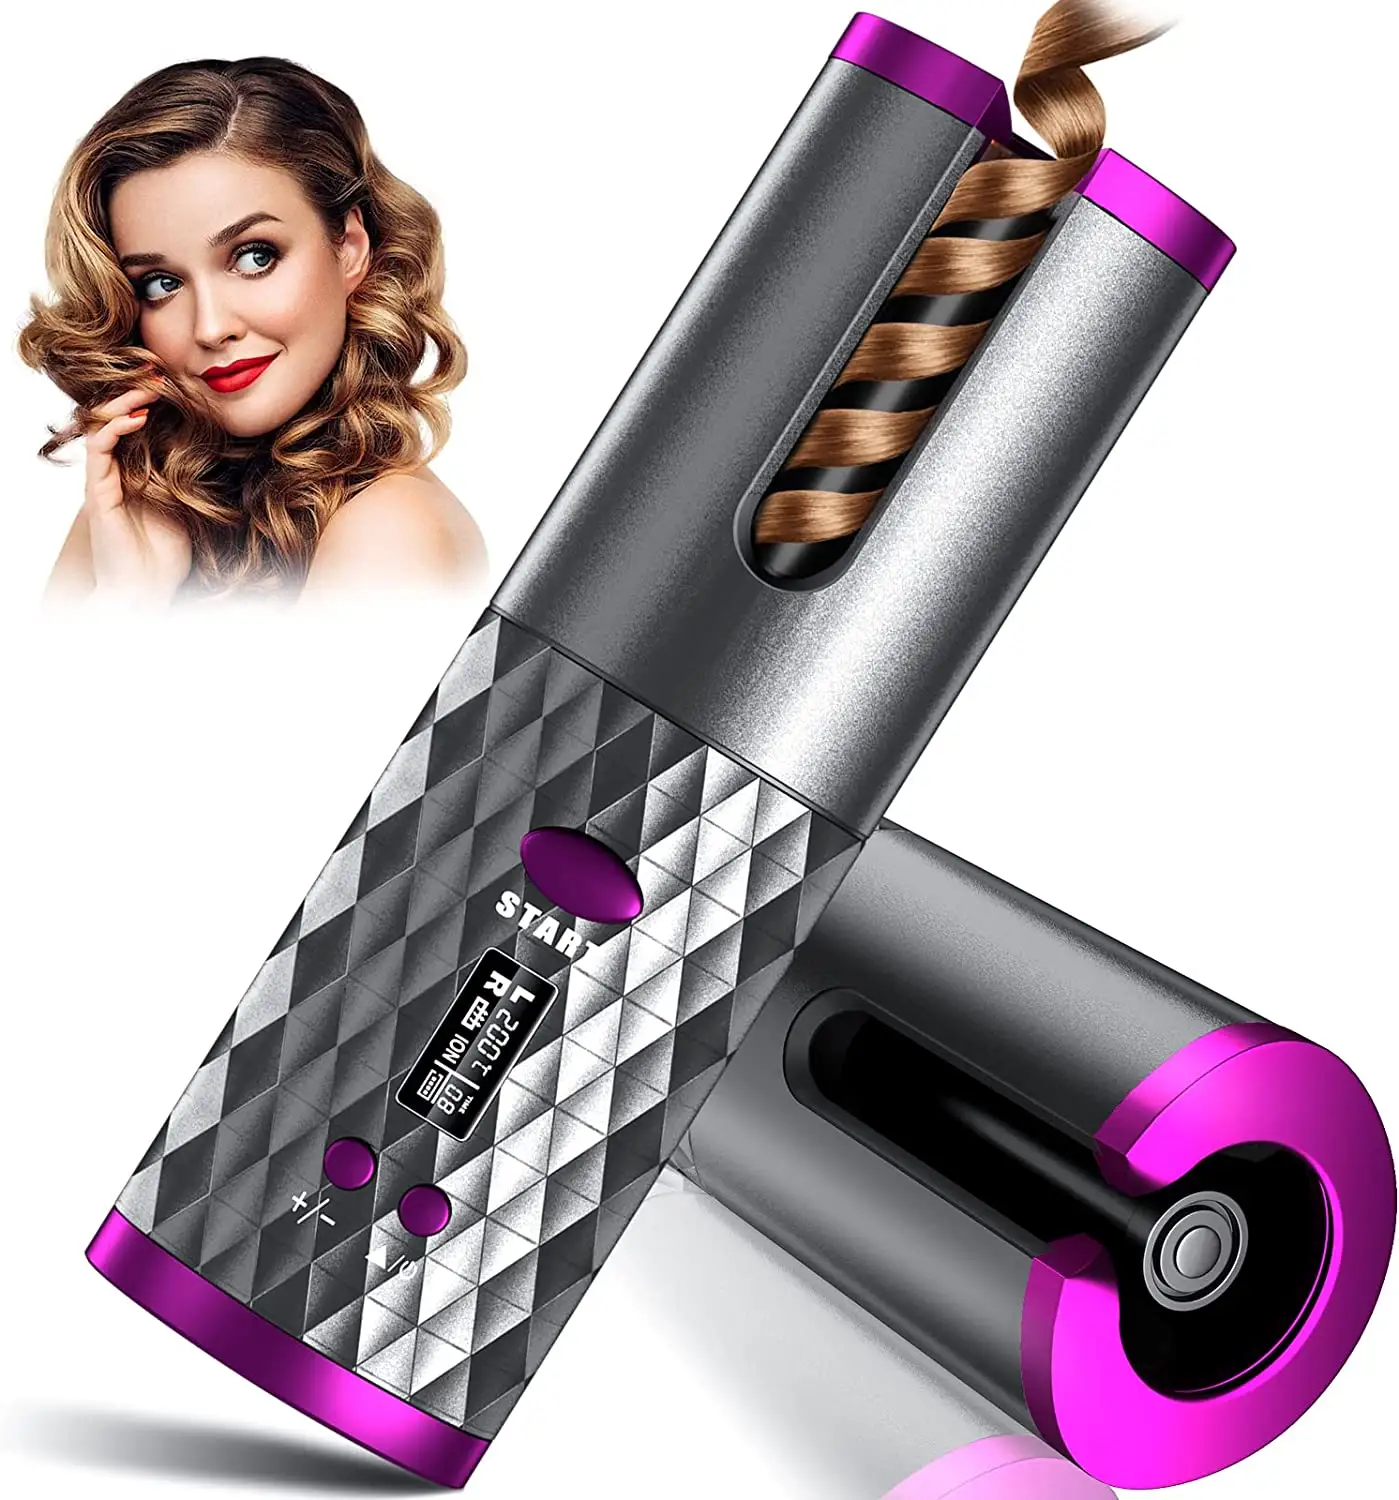 New Automatic Rotating Curling Iron LCD Display Wireless Ceramic Hair Curling Iron Cordless Heatless Hair Curler